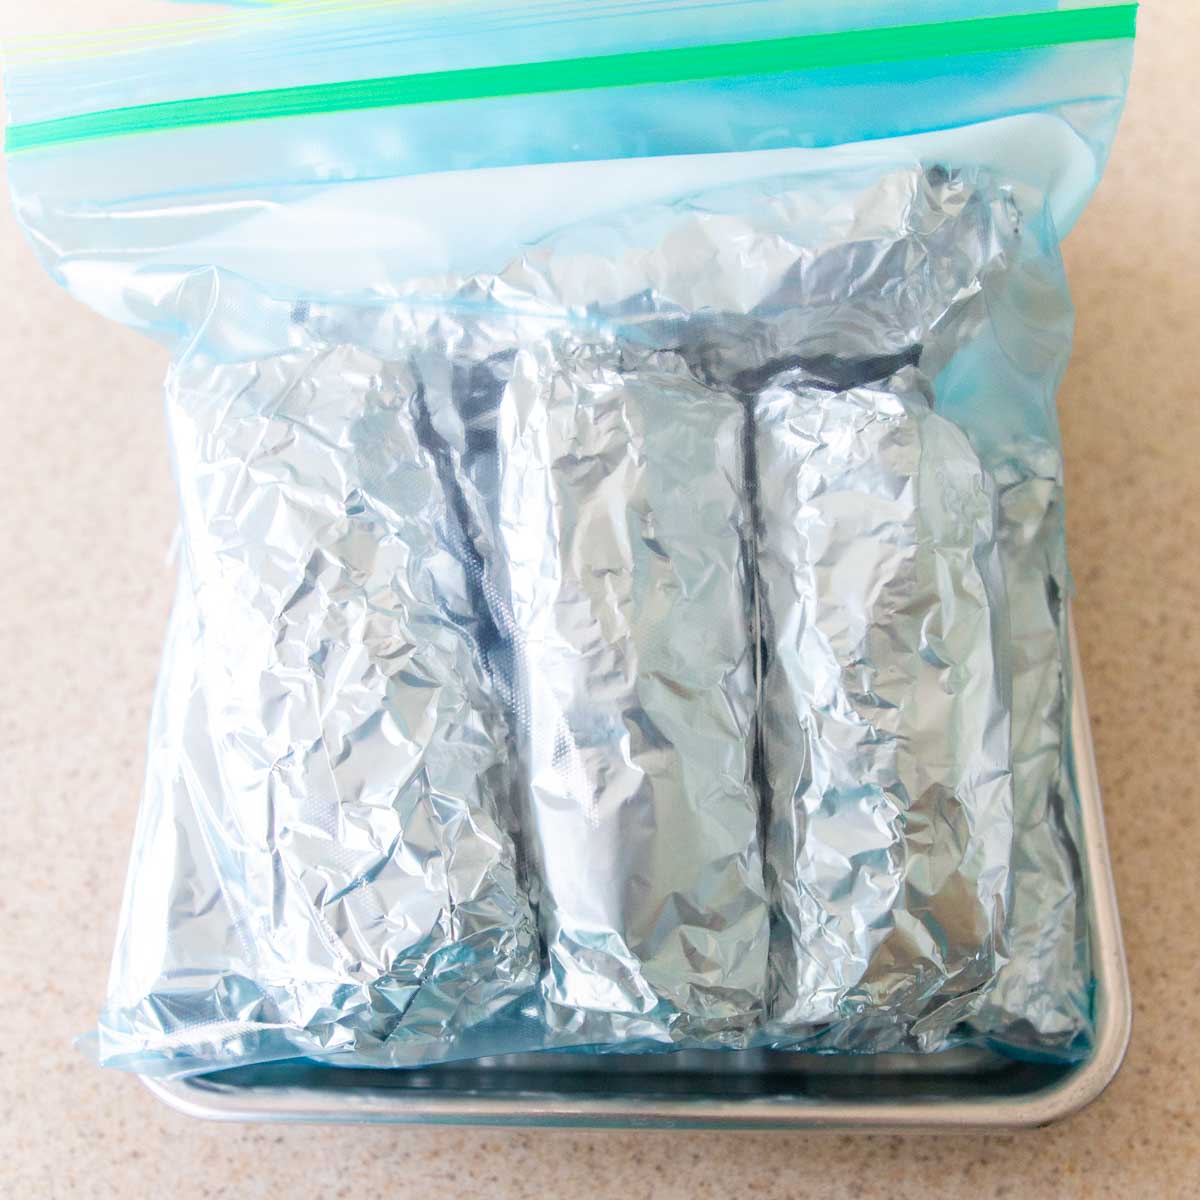 The burritos are wrapped in foil and tucked inside a large plastic bag for the freezer.